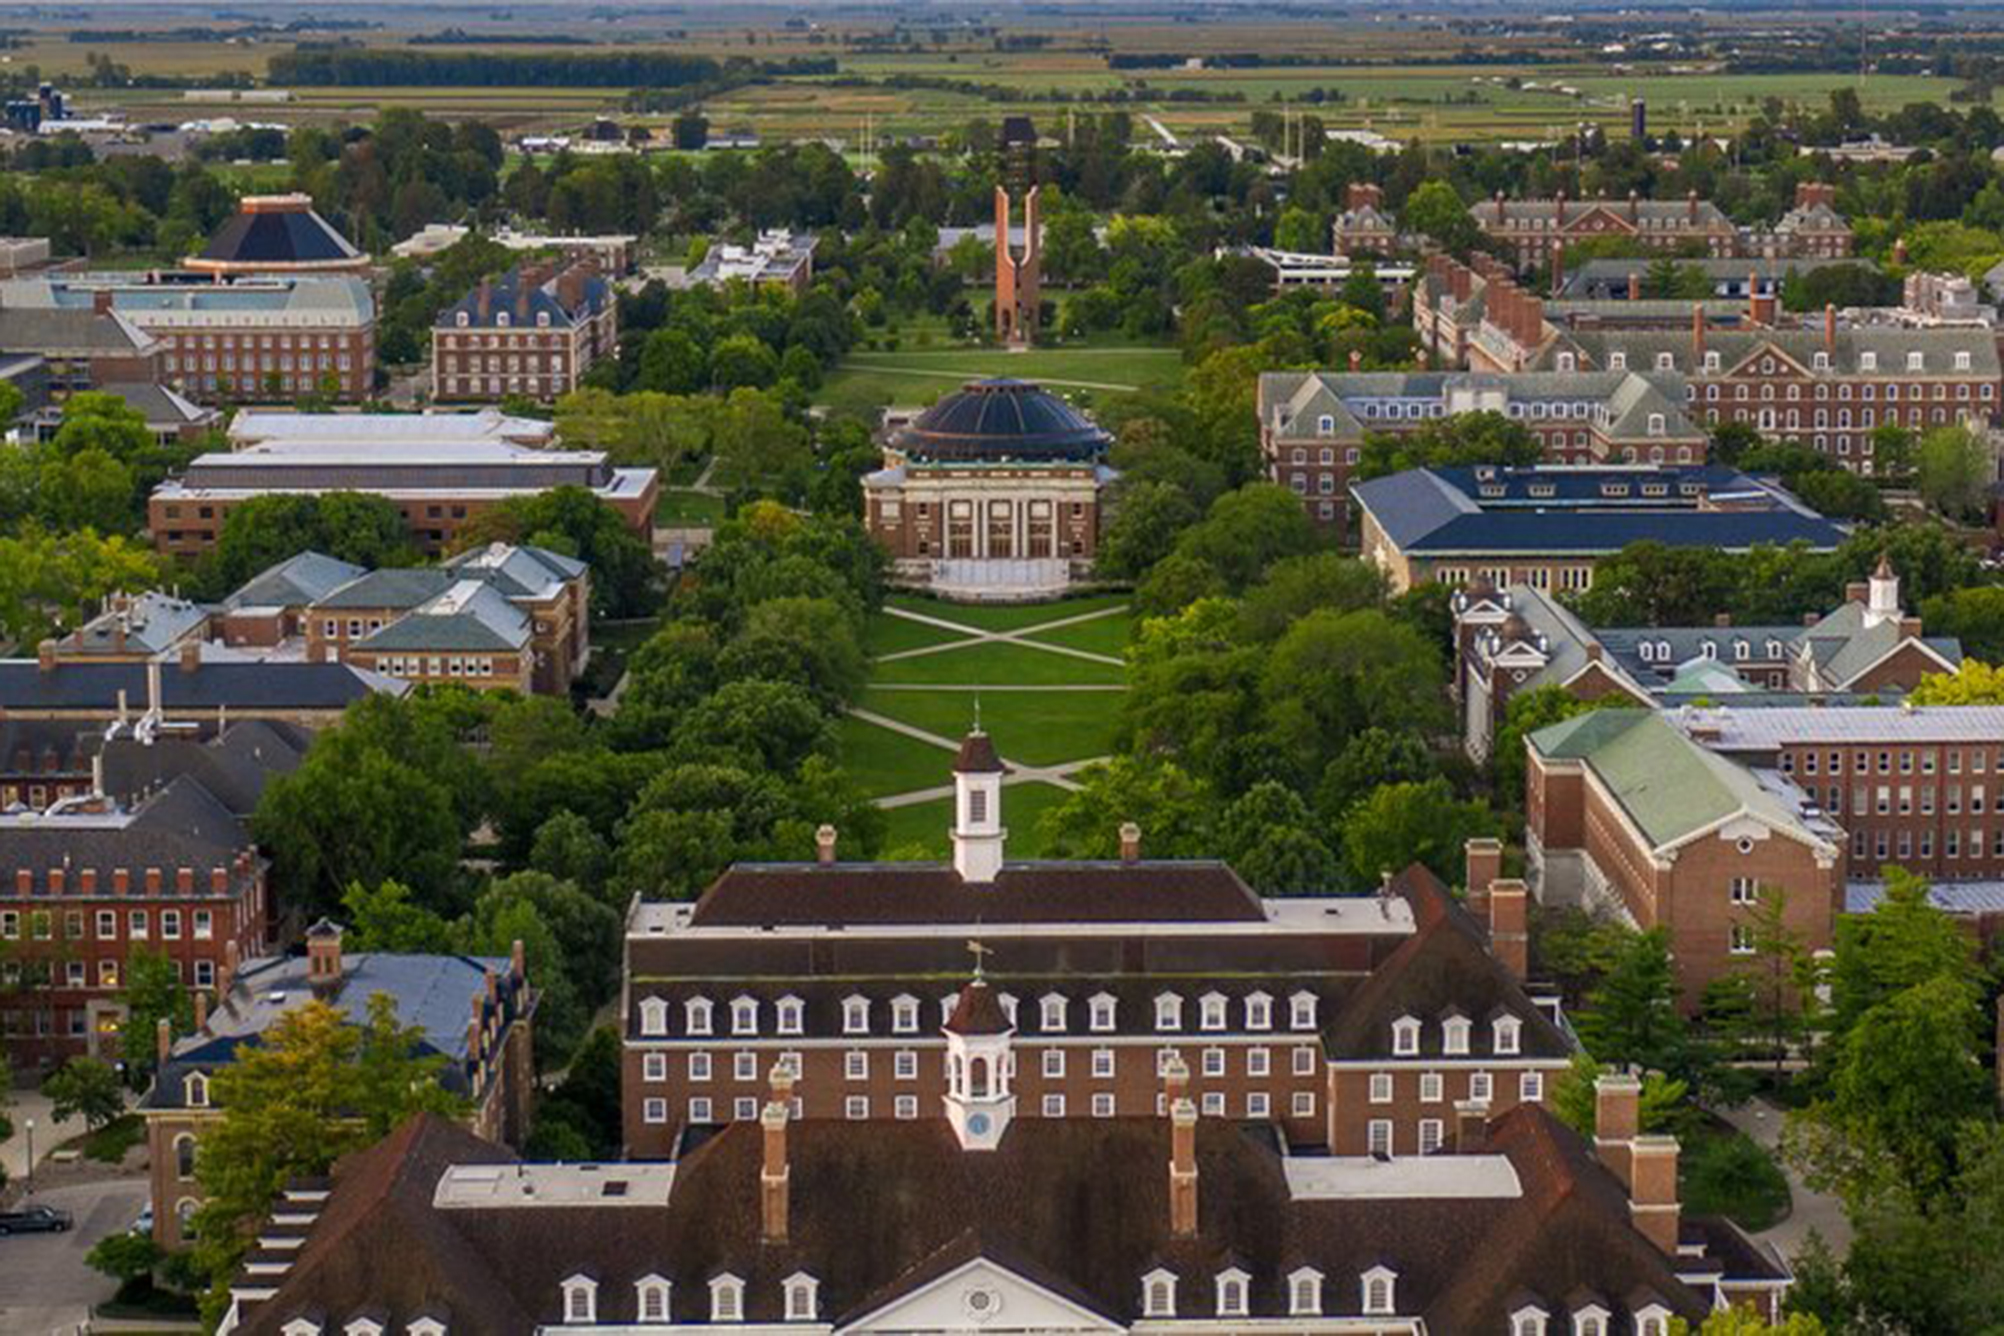 Aerial view of the Main Quad and surrounding campus area.